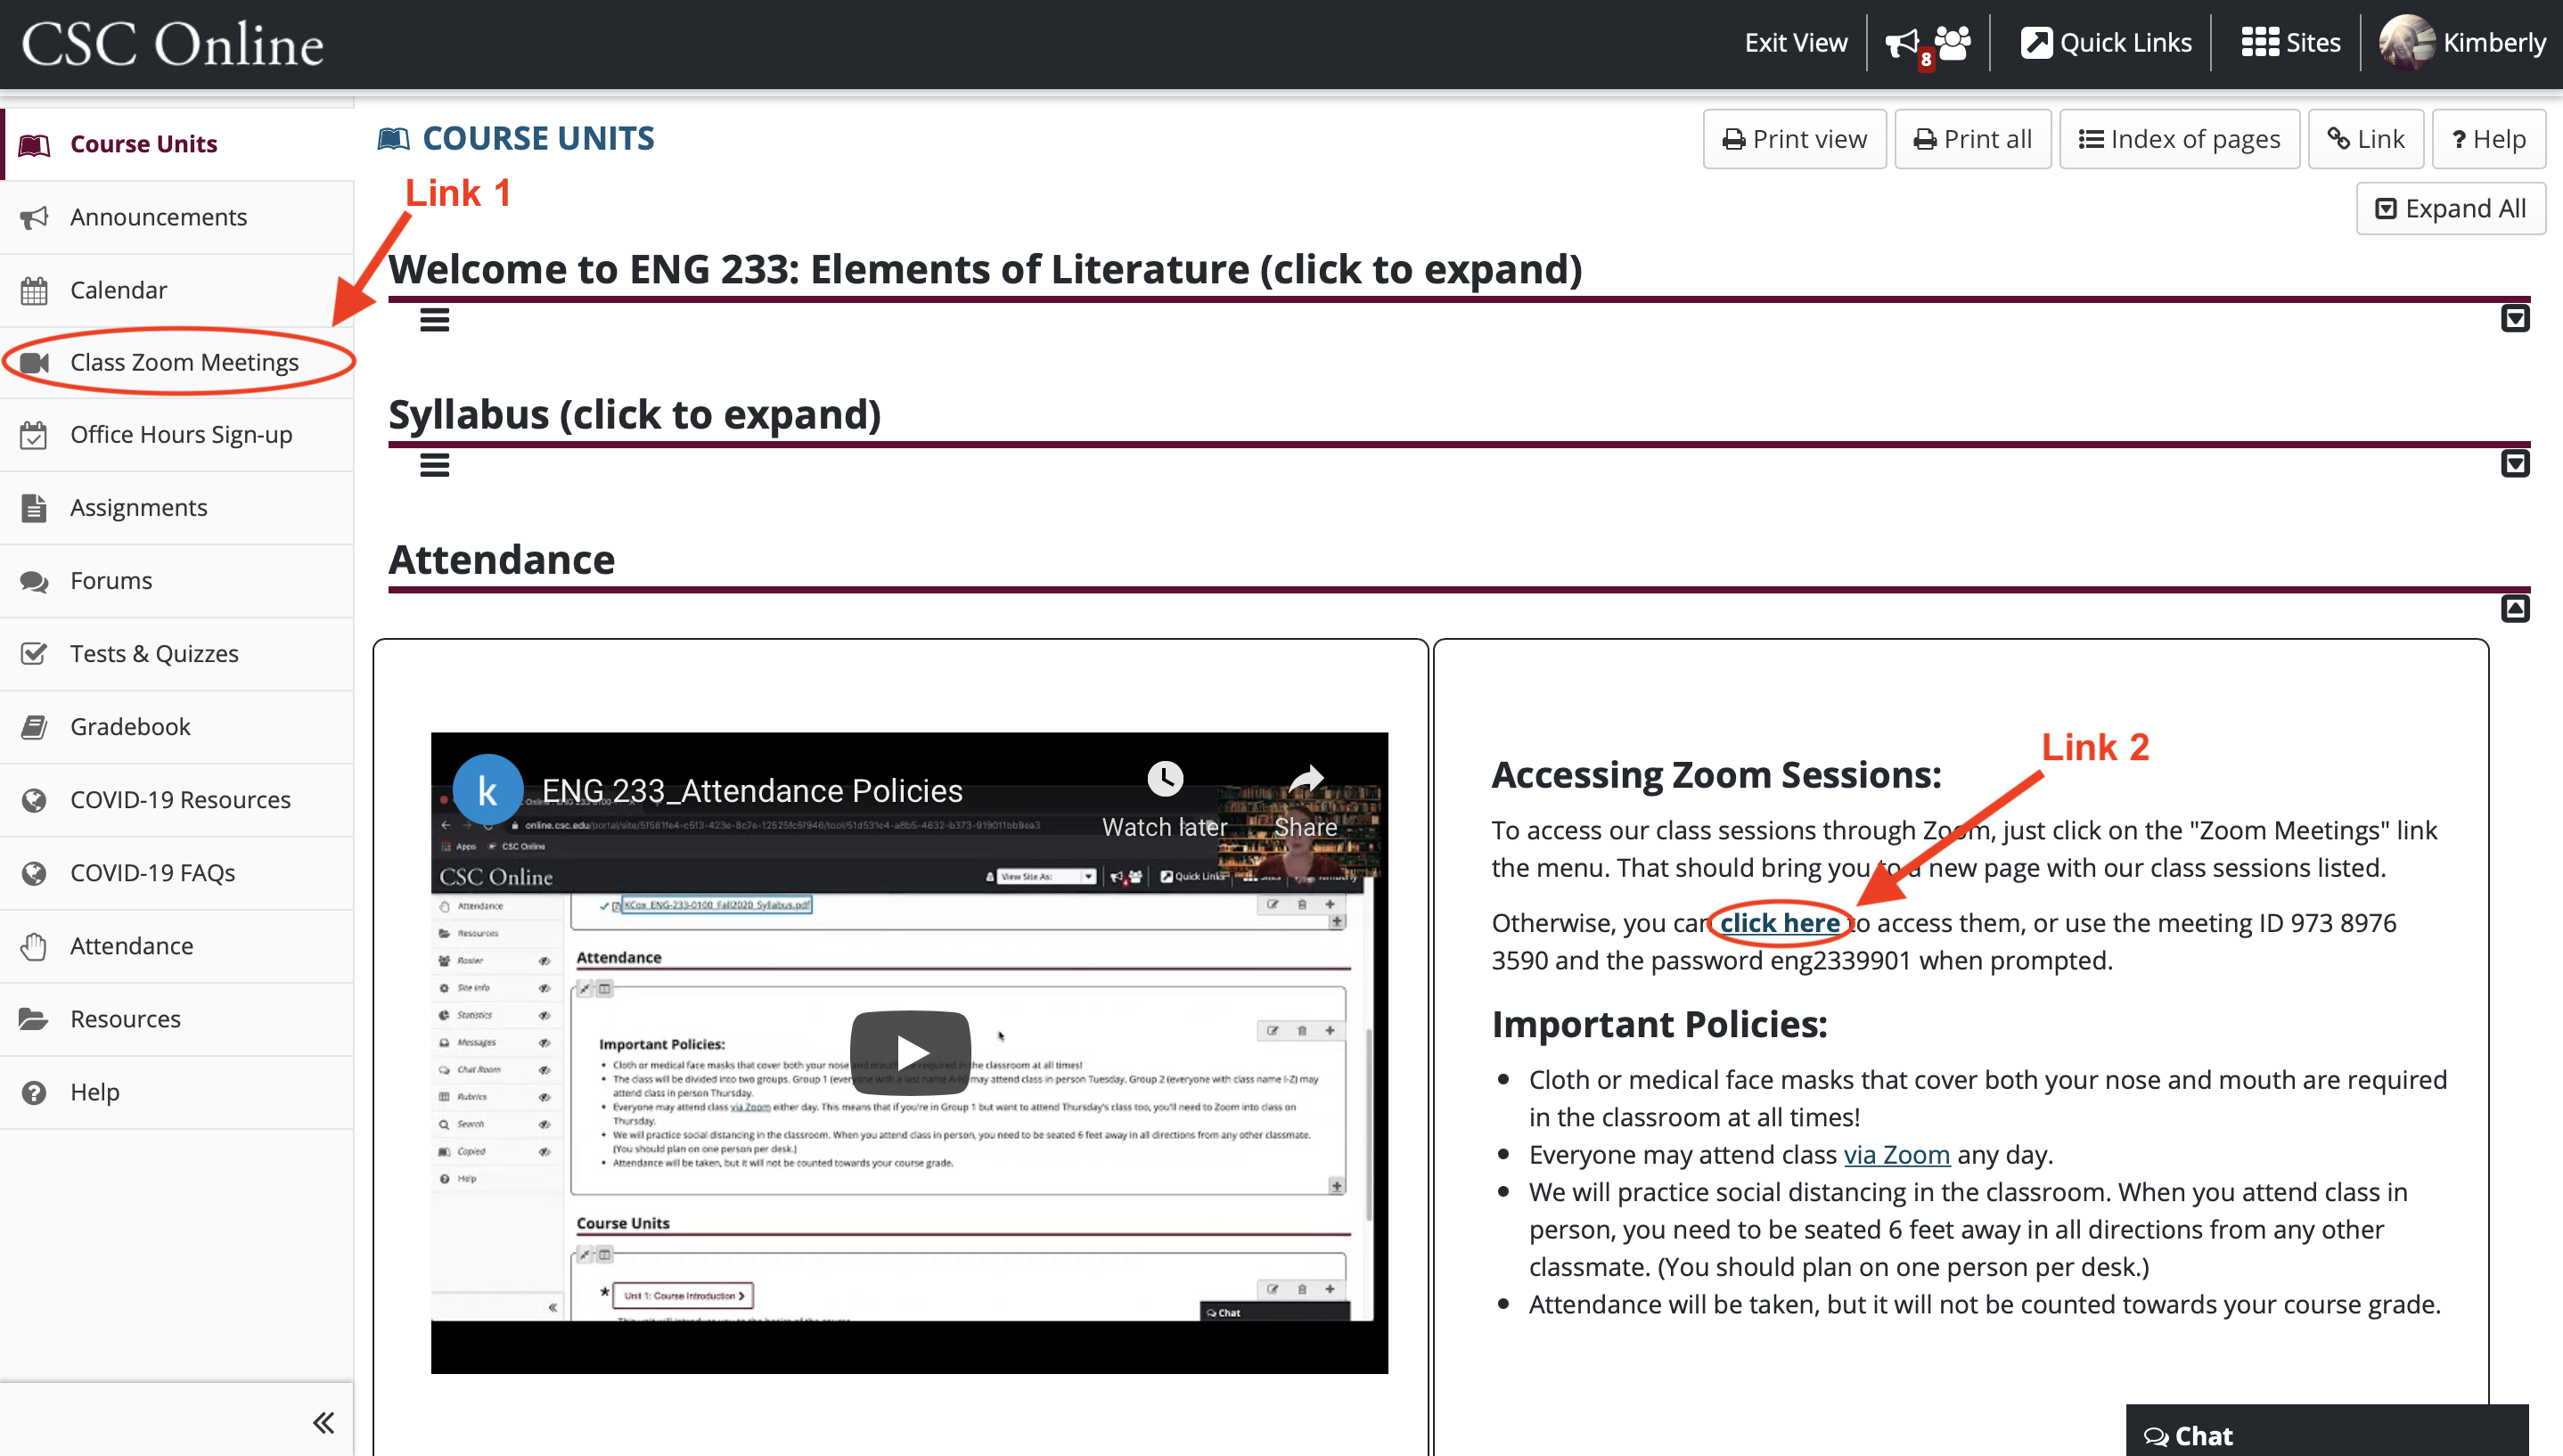 Fig. 1: Screenshot of my Home Page in CSC Online (a Sakai LMS) for Elements of Literature with red arrows and circles indicating Zoom meeting links